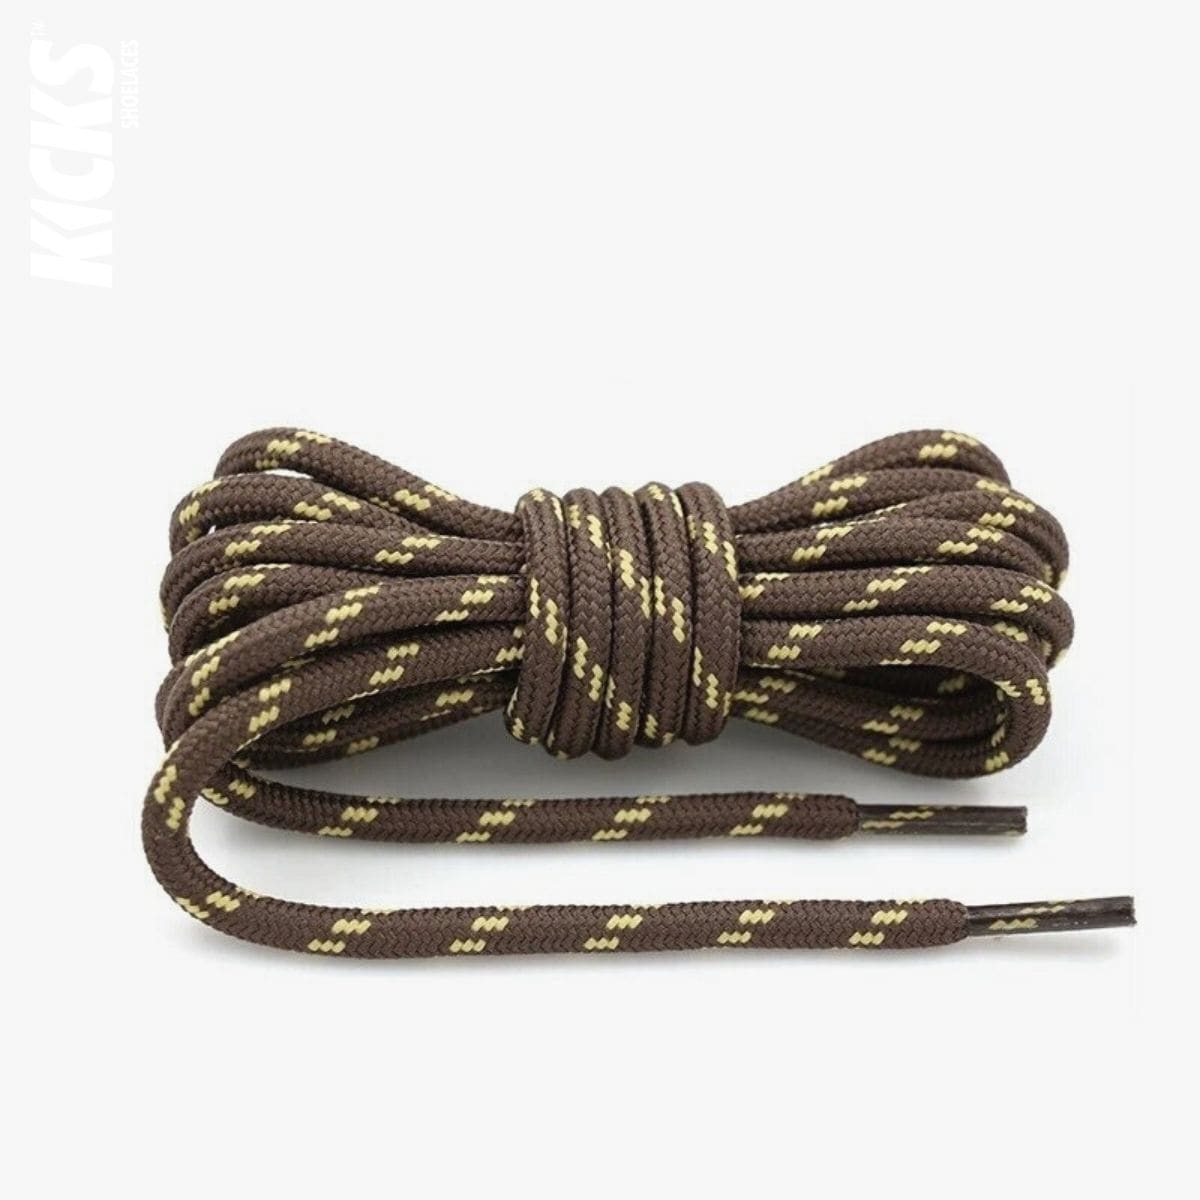 trekking-shoe-laces-united-states-in-dark-brown-and-yellow-shop-online